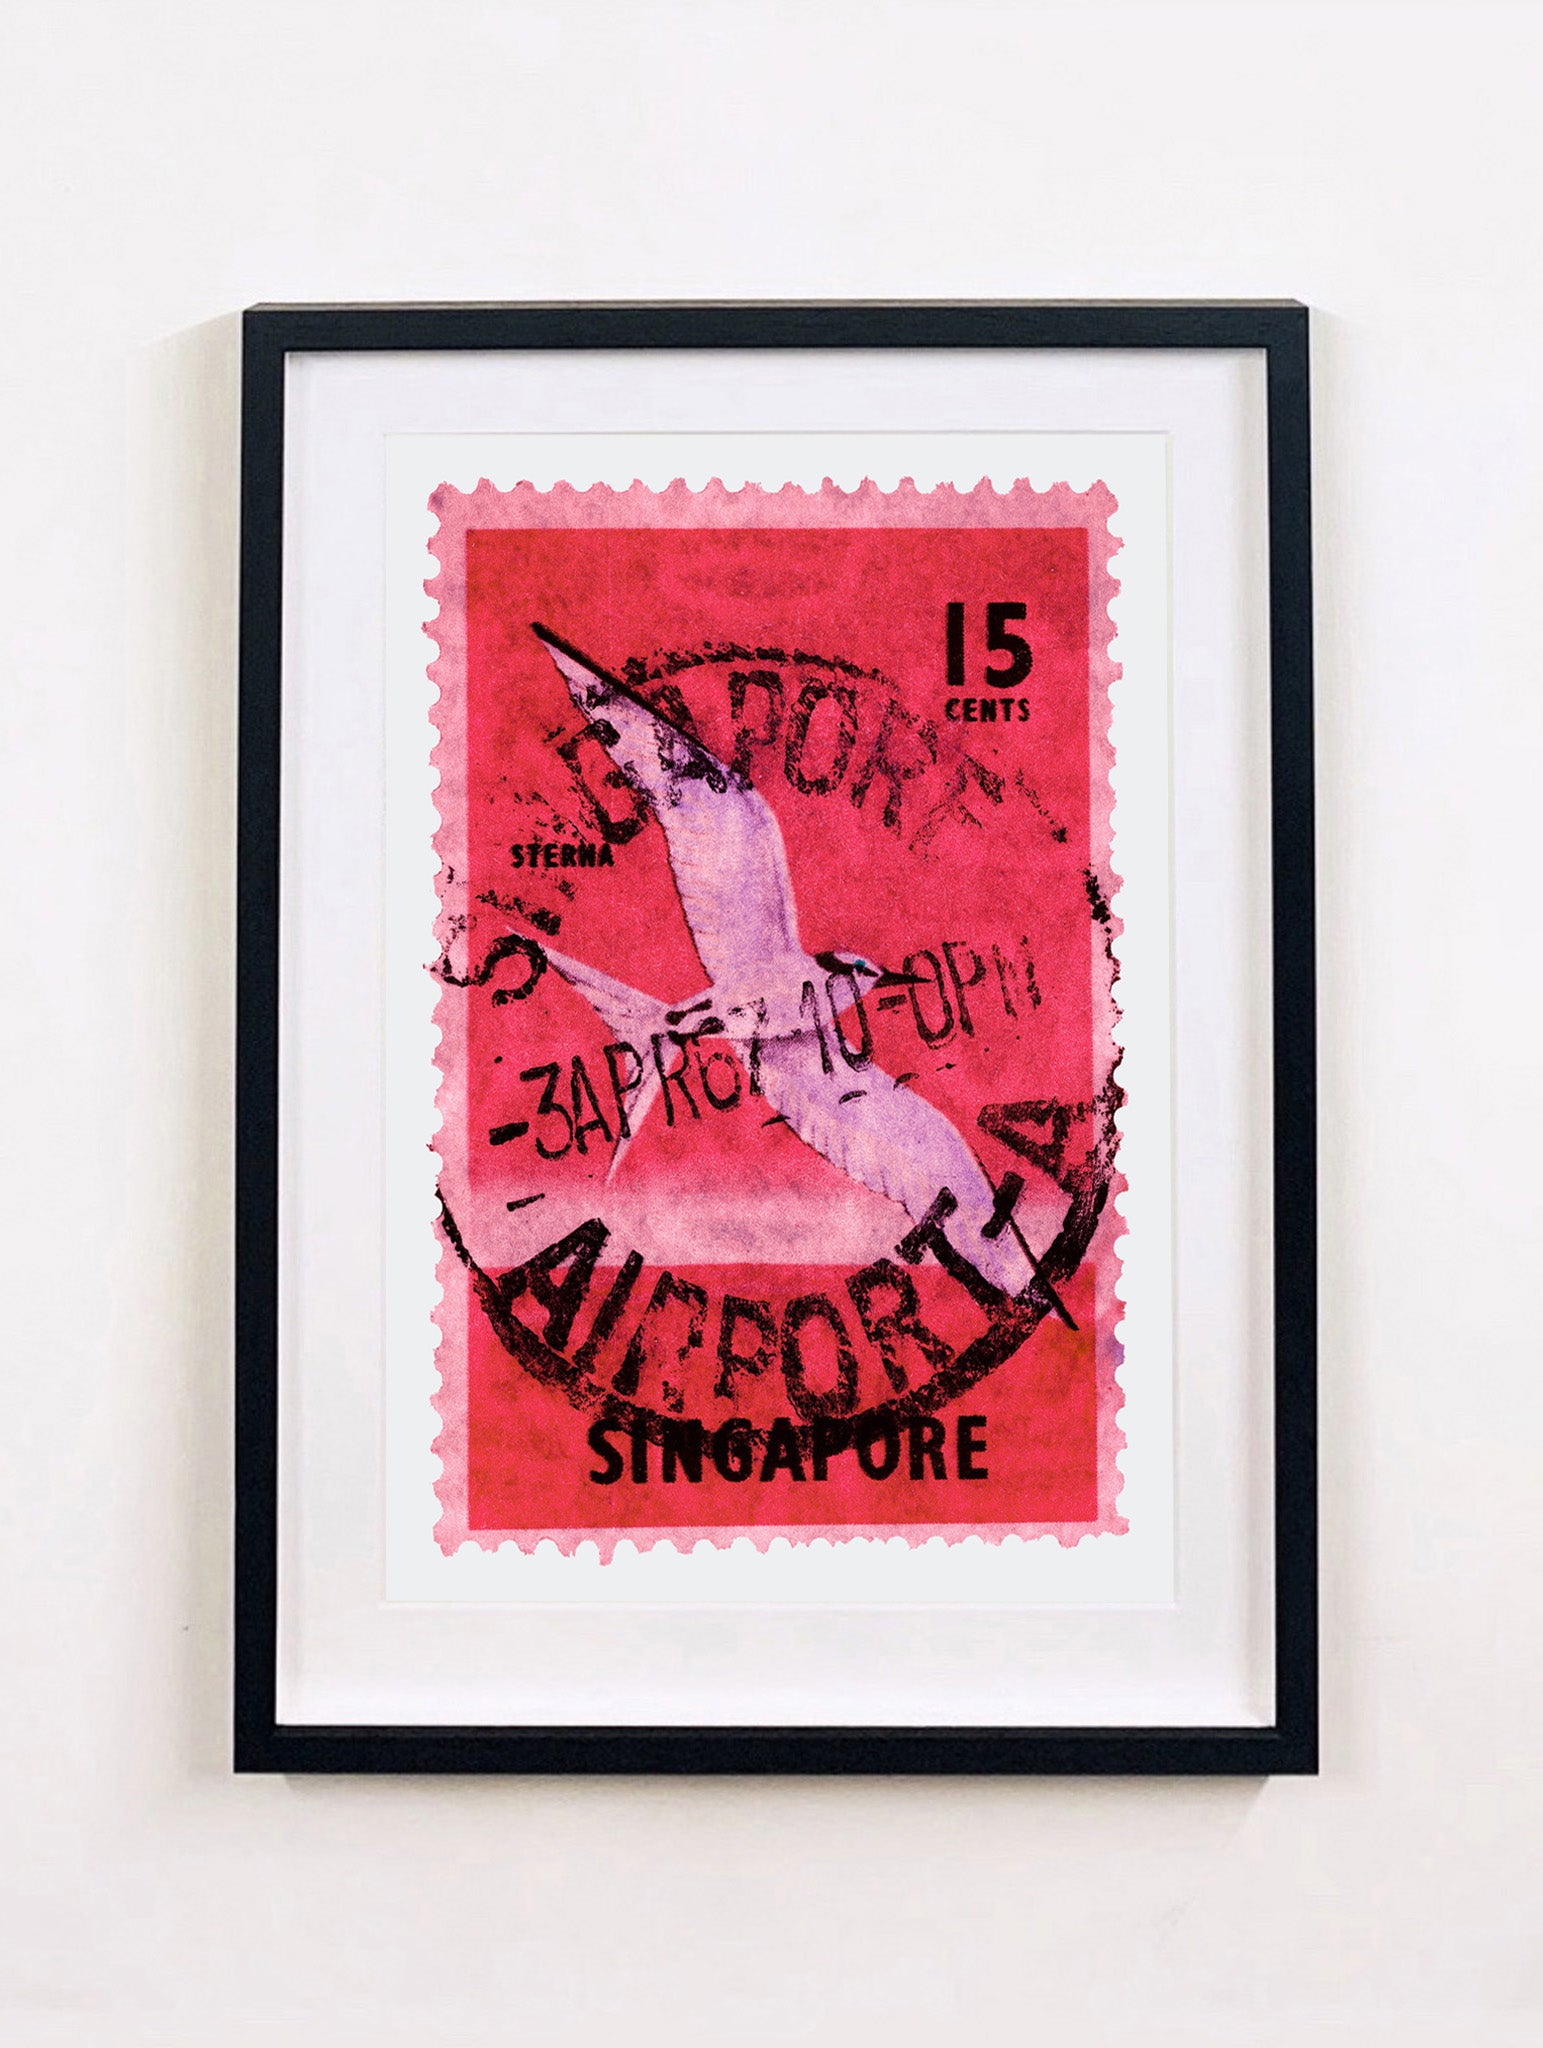 Singapore Stamp Collection '15 cents Singapore Sterna Stamp' (Pink). These historic postage stamps that make up the Heidler & Heeps Stamp Collection, Singapore Series 'Postcards from Afar' have been given a twenty-first century pop art lease of life. The fine detailed tapestry of the original small postage stamp has been brought to life, made unique by the franking stamp and Heidler & Heeps specialist darkroom process.